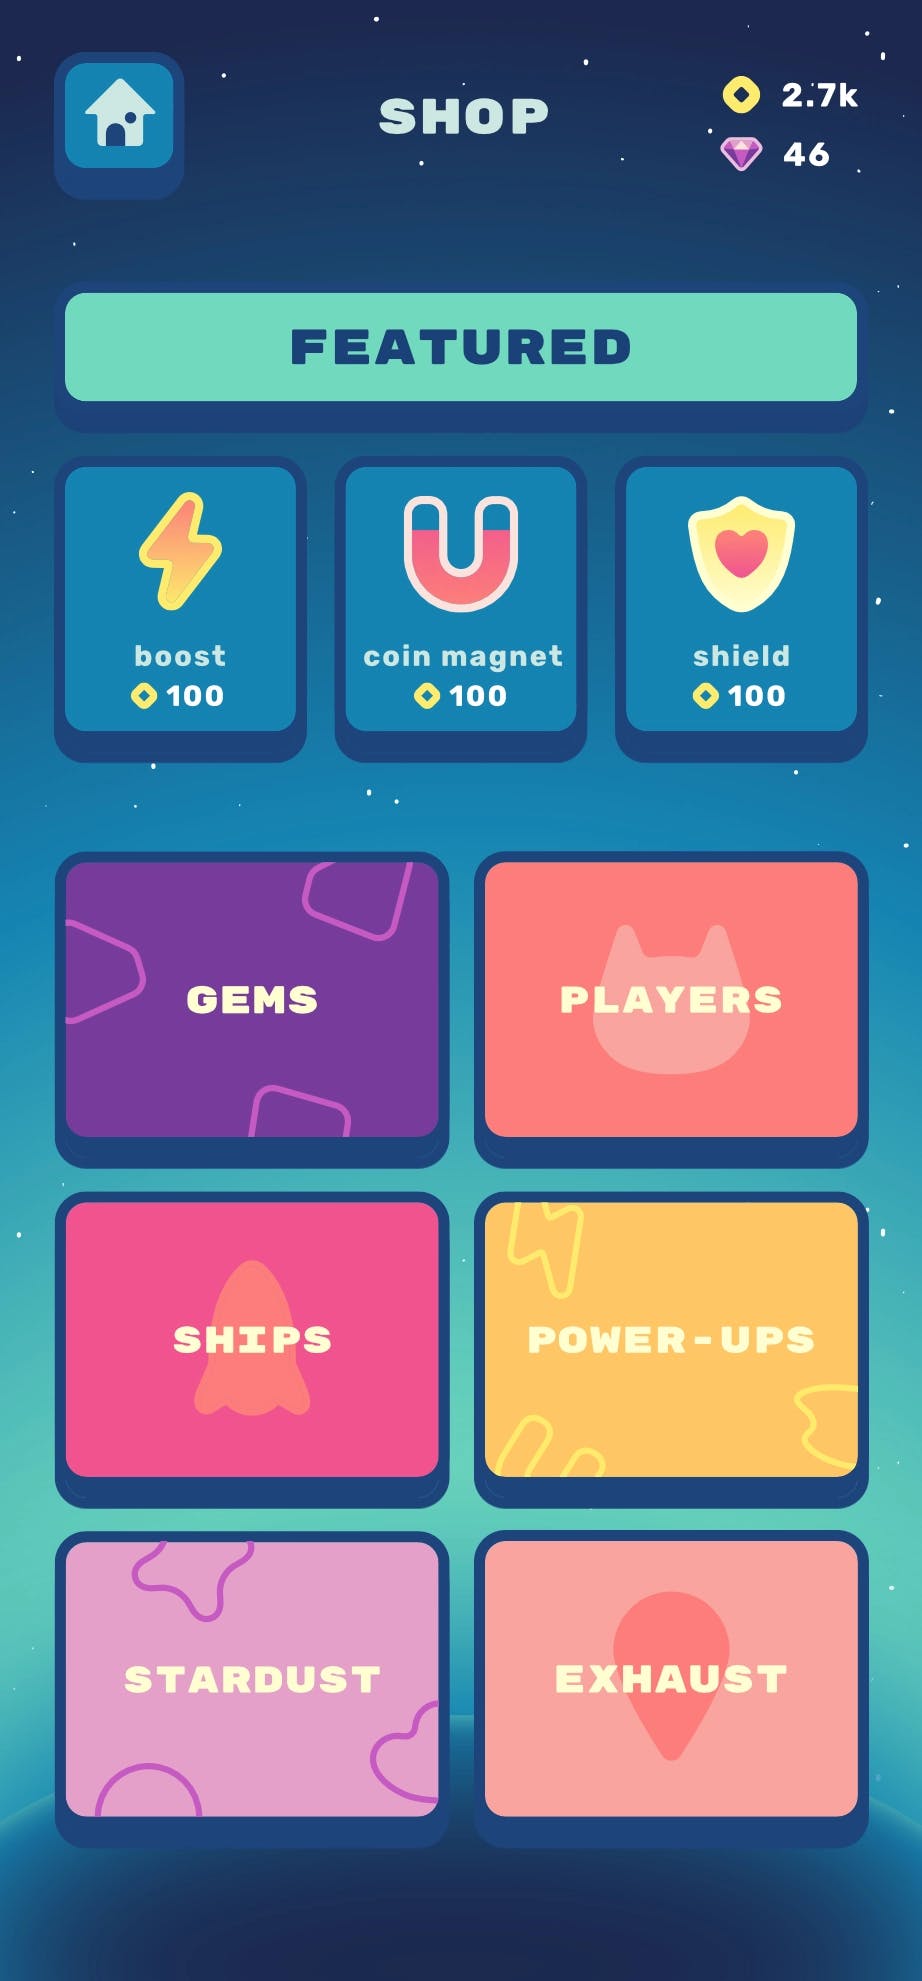 screenshot of the shop home screen. at the top are featured items, including the boost, coin magnet, and shield power-ups. at the bottom are category buttons: gems, players, ships, power-ups, stardust, and exhaust.